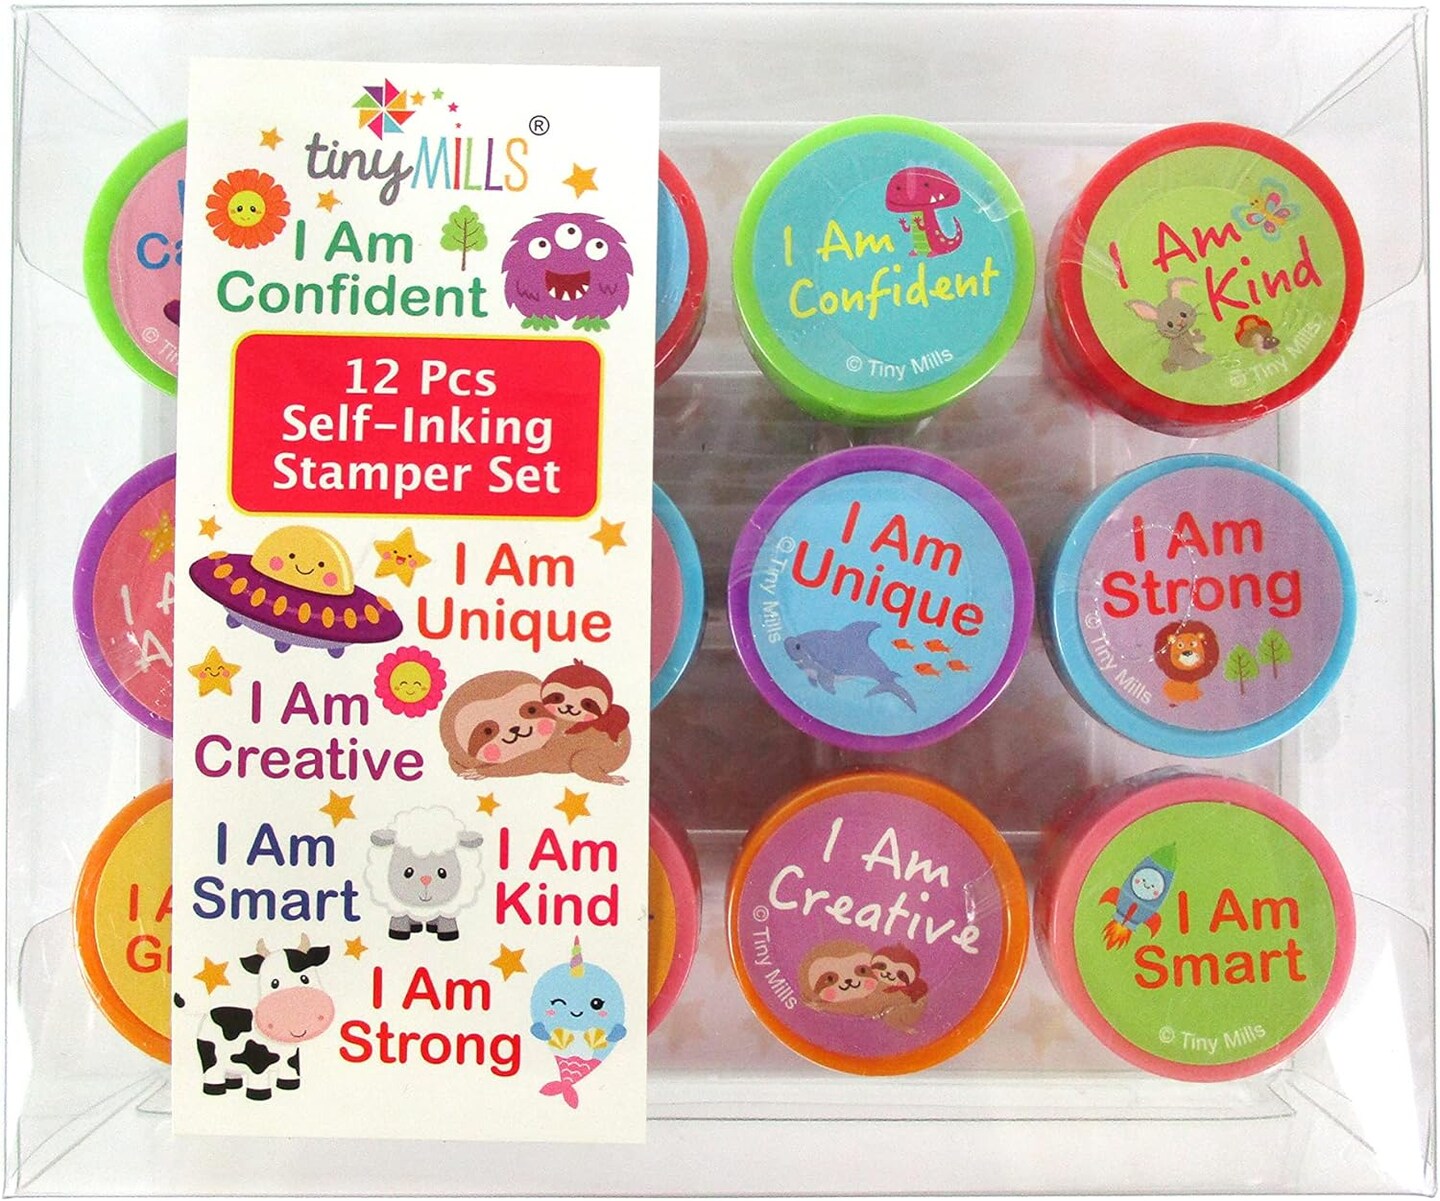 TINYMILLS 12 Pcs Positive Affirmation Stamp Kit for Kids - Positive Mindfulness Self Inking Stamps